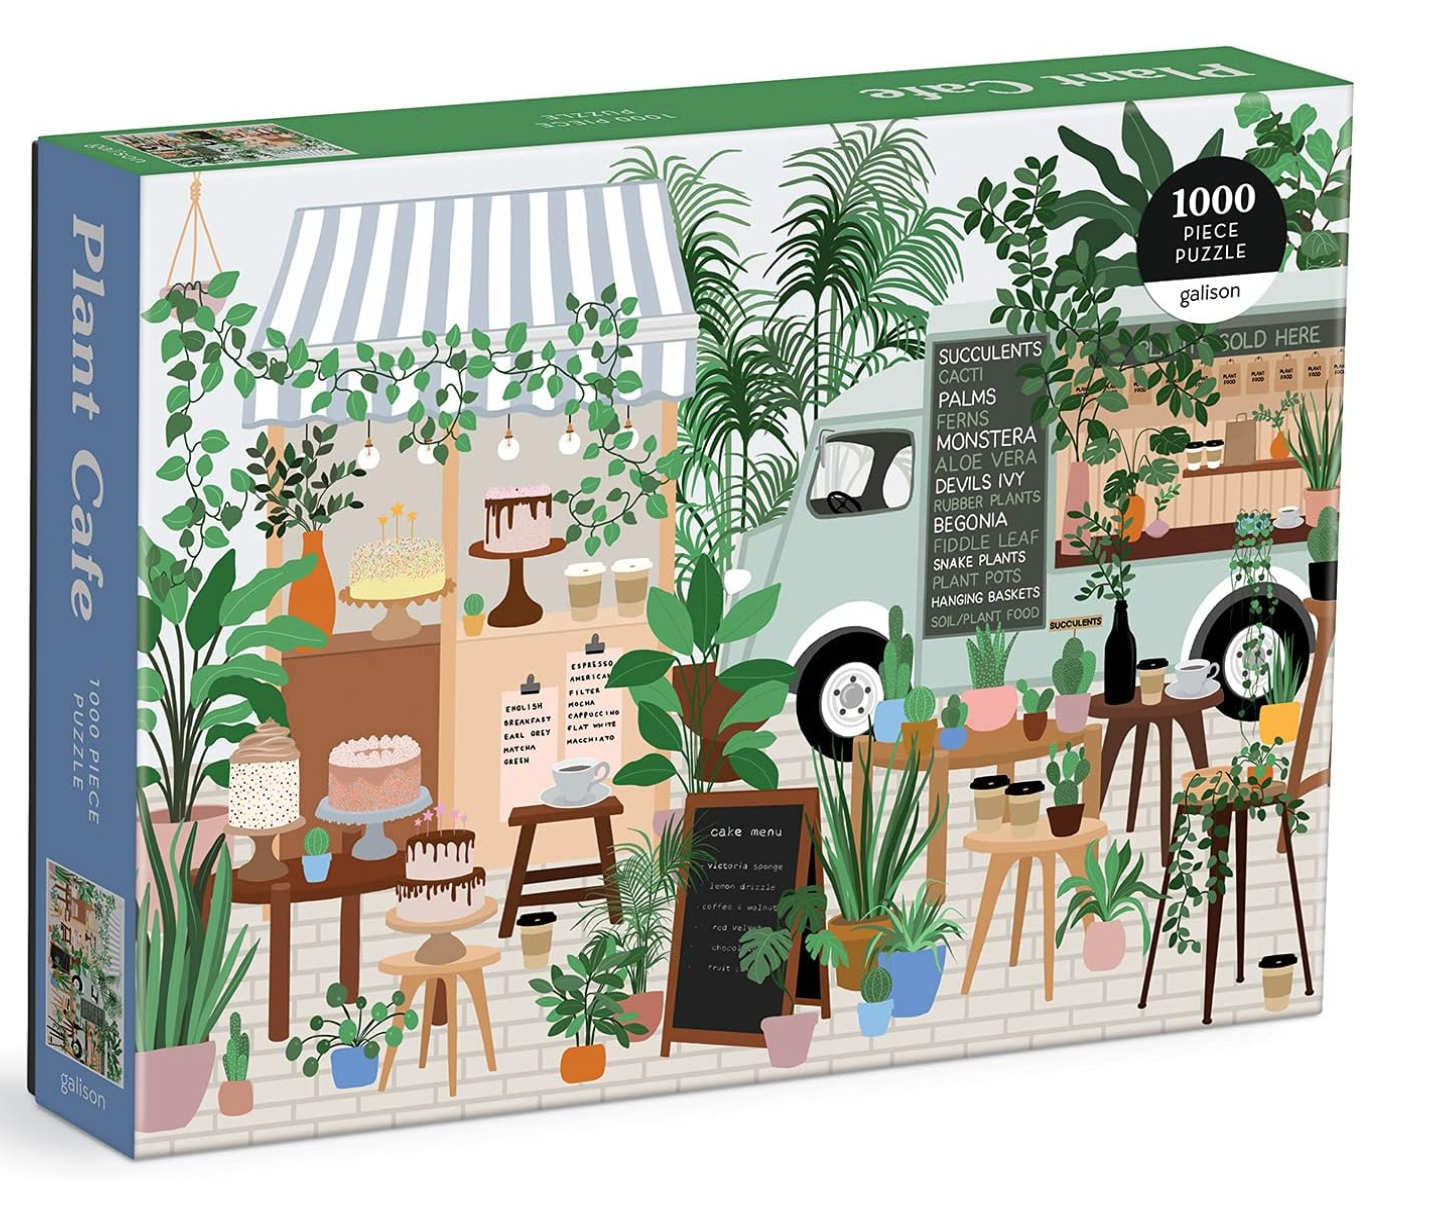 Plant Cafe 1000 Piece Puzzle from Galison